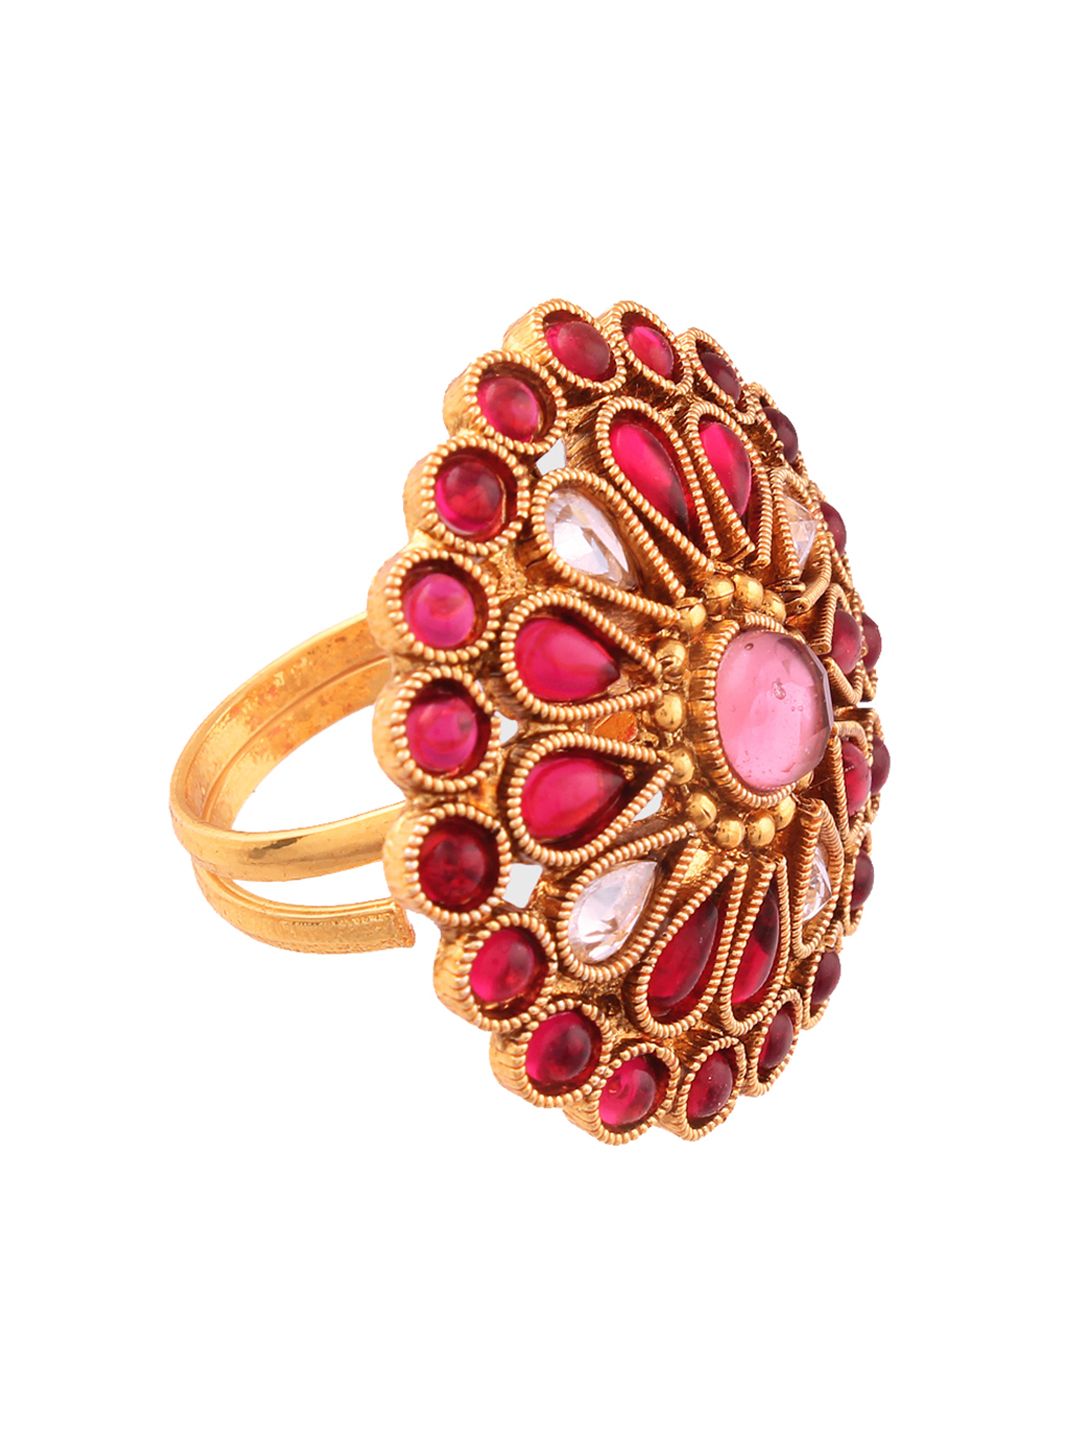 AccessHer Women Gold-Plated & Pink Stone-Studded Ring Price in India